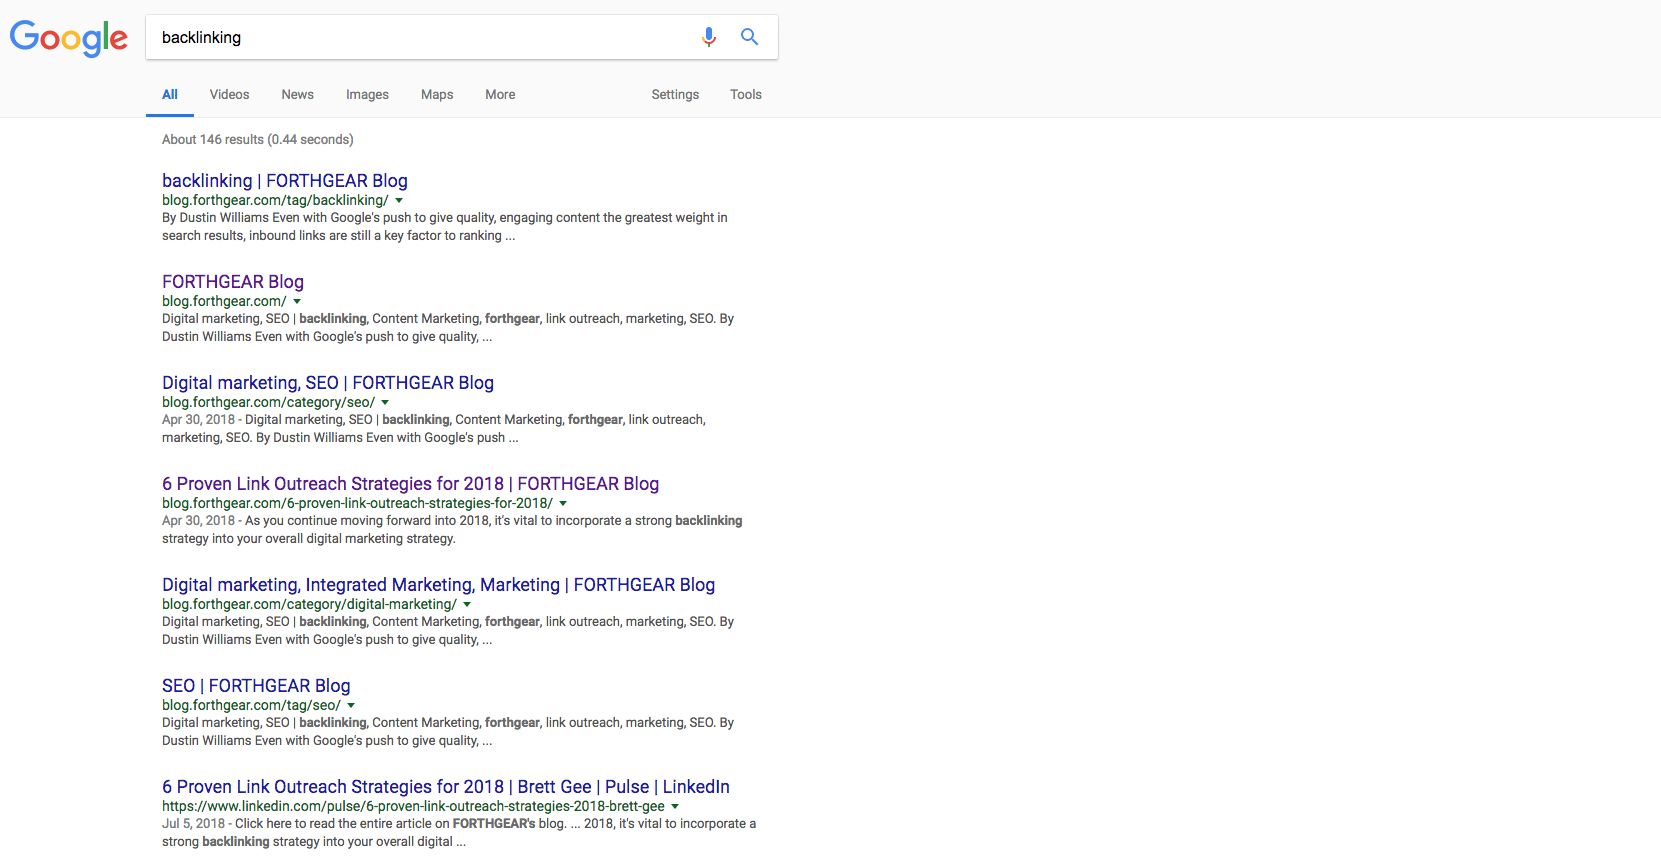 Content vs links search results